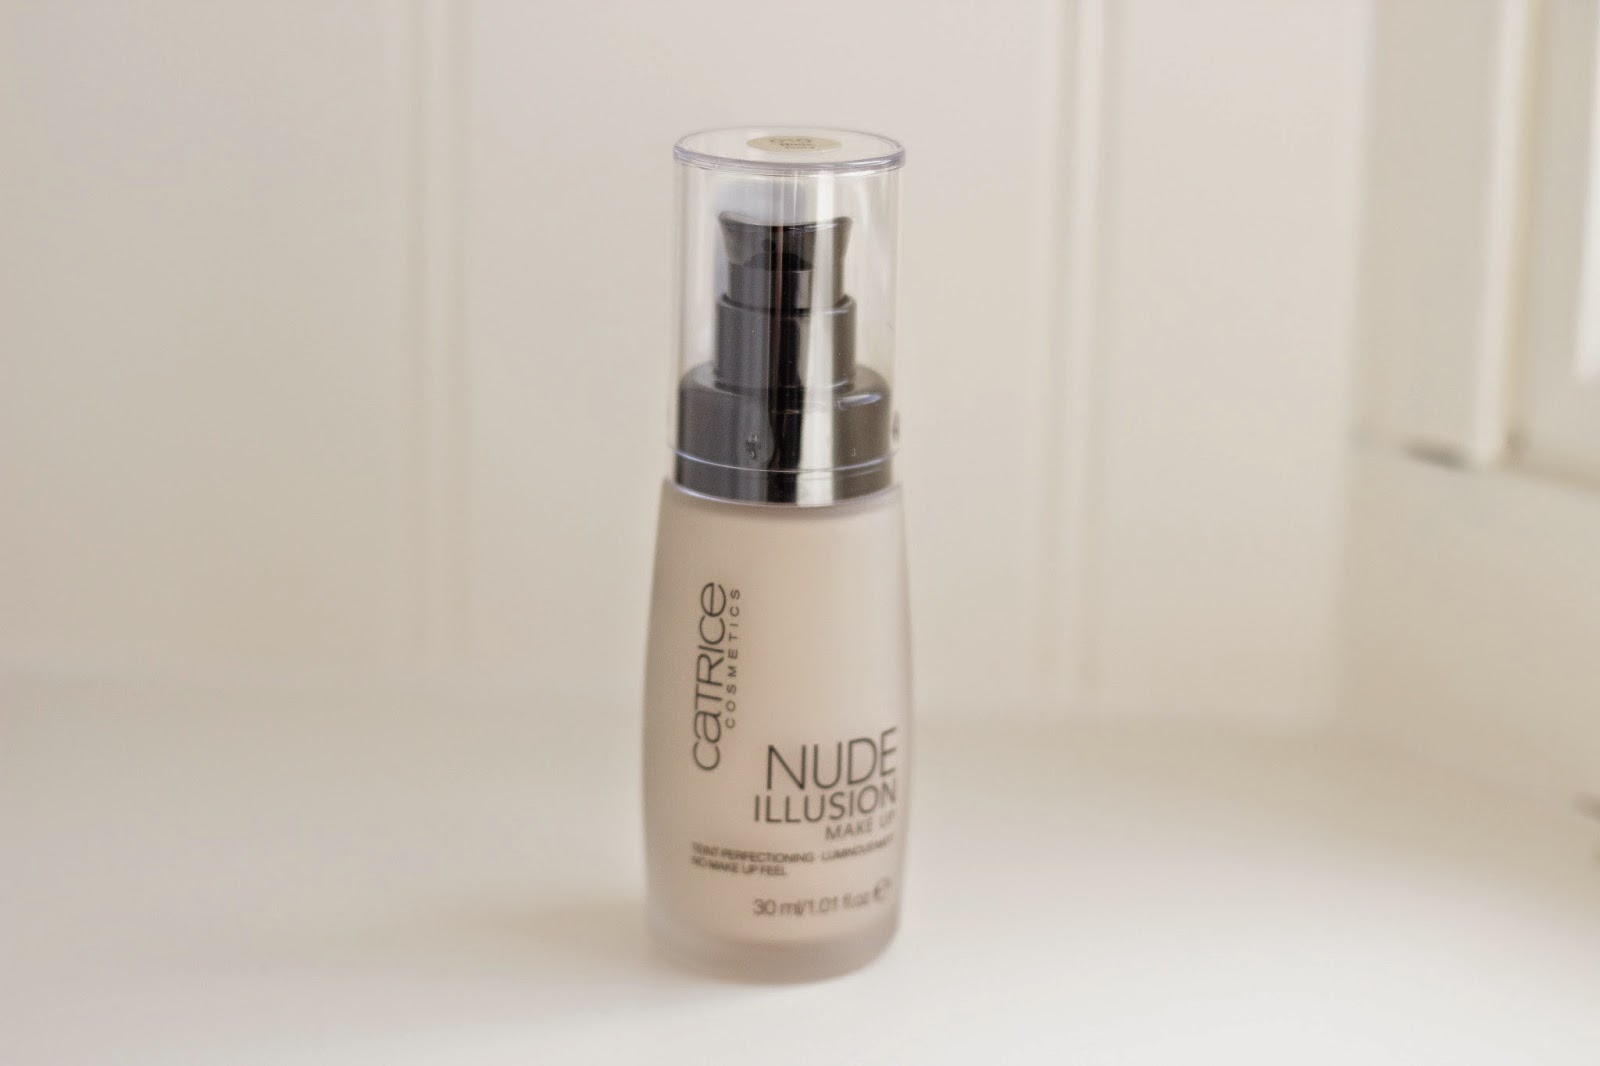 review catrice nude illusion foundation, catrice nude illusion foundation full face